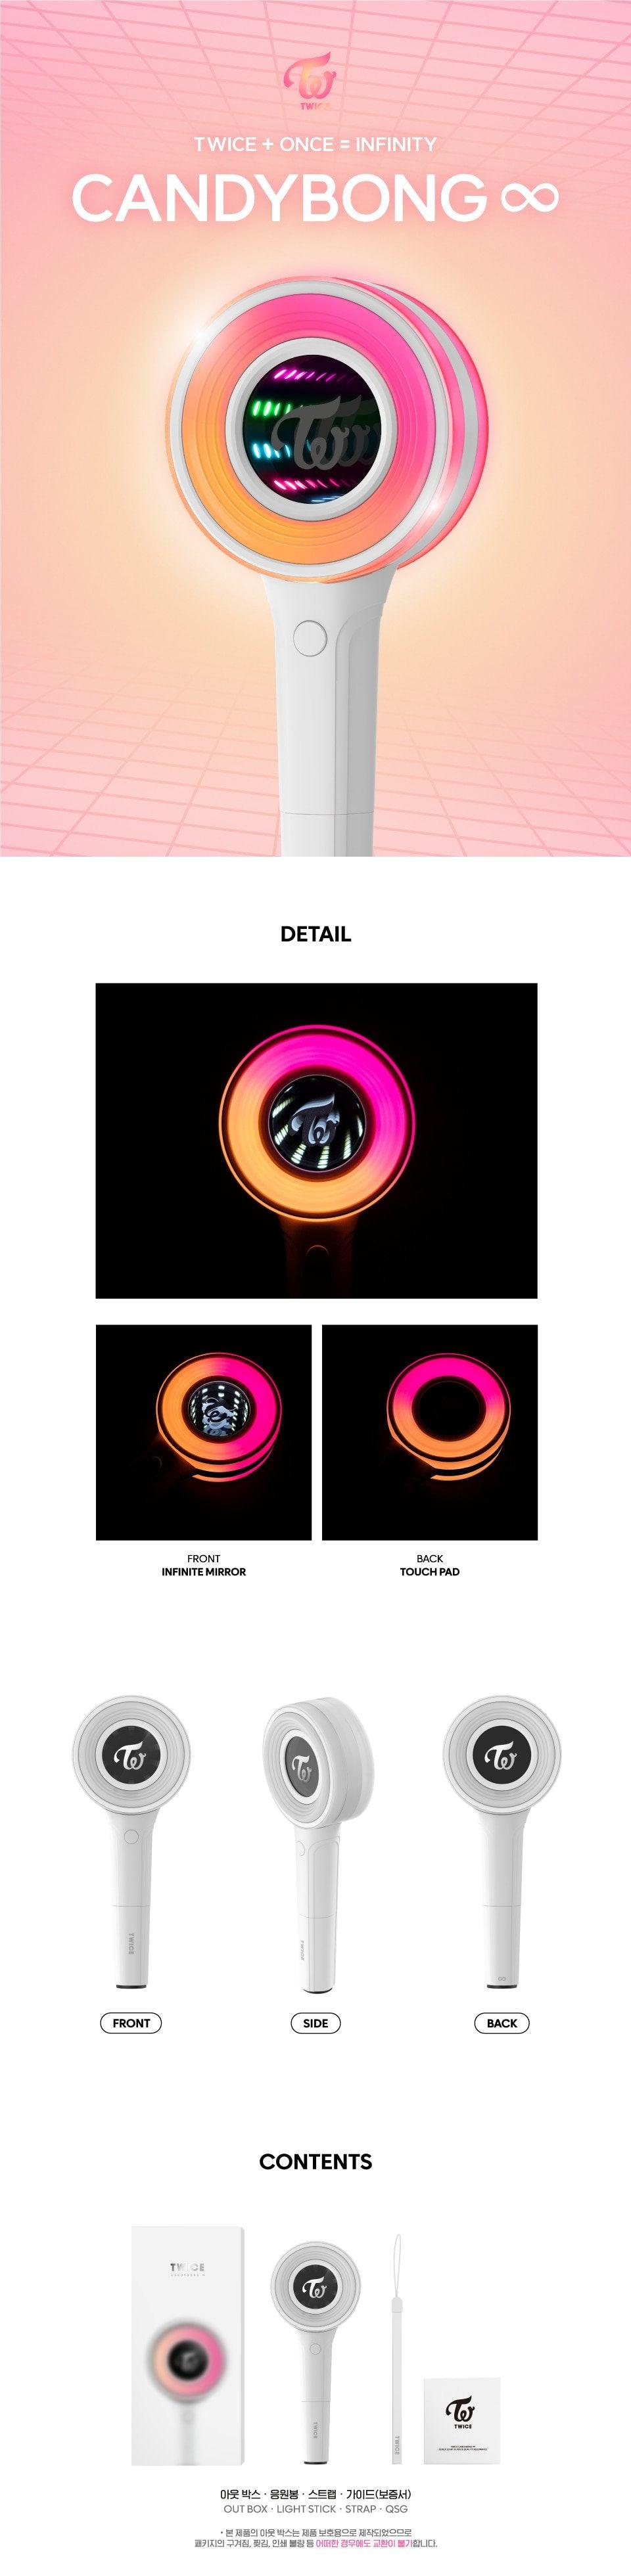 TWICE - OFFICIAL LIGHT STICK V.2 [CANDYBONG ∞]